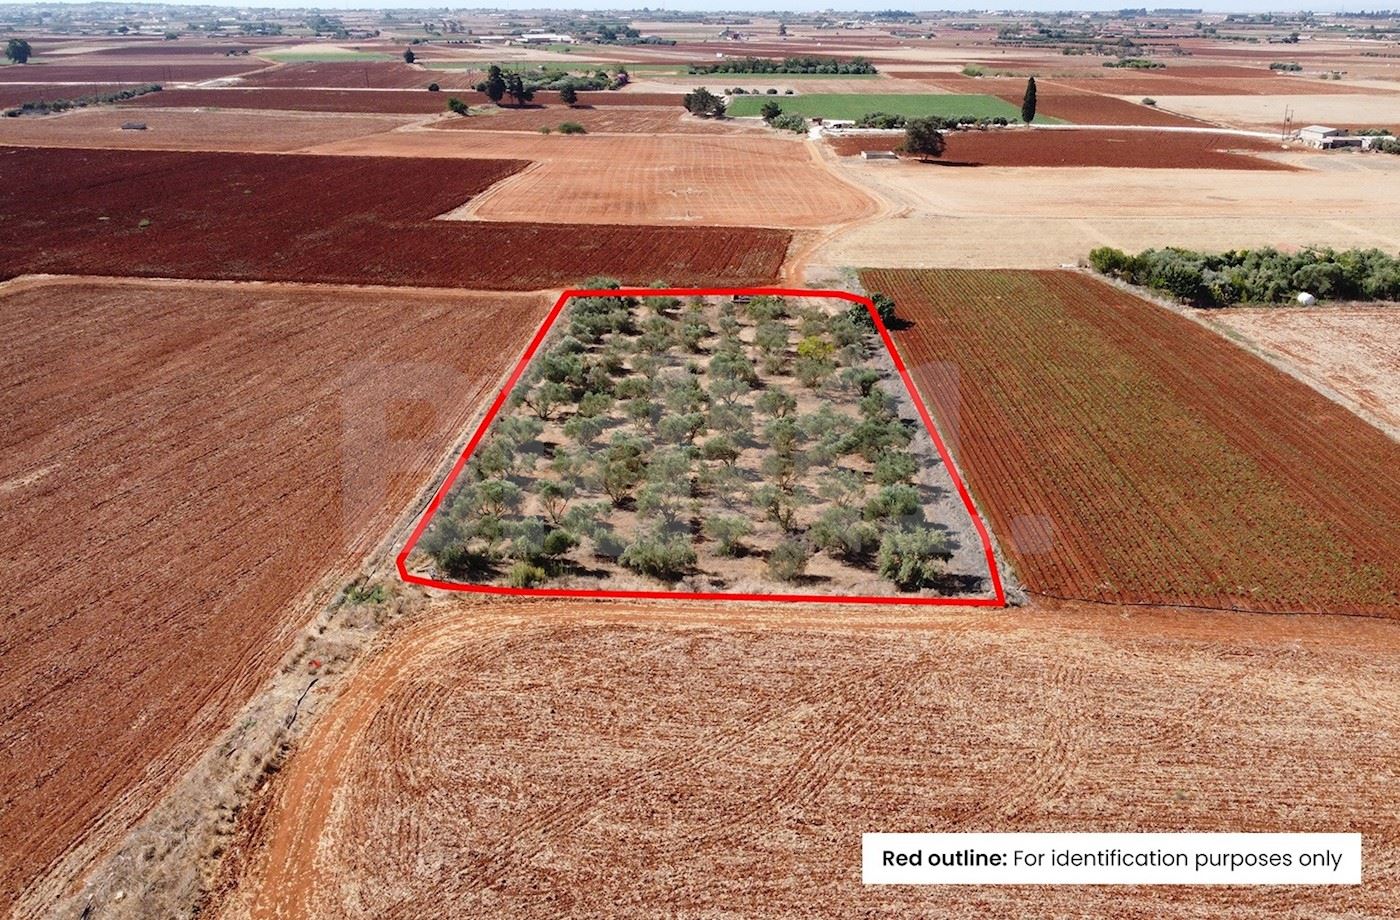 Agricultural Field in Avgorou, Famagusta 1/3